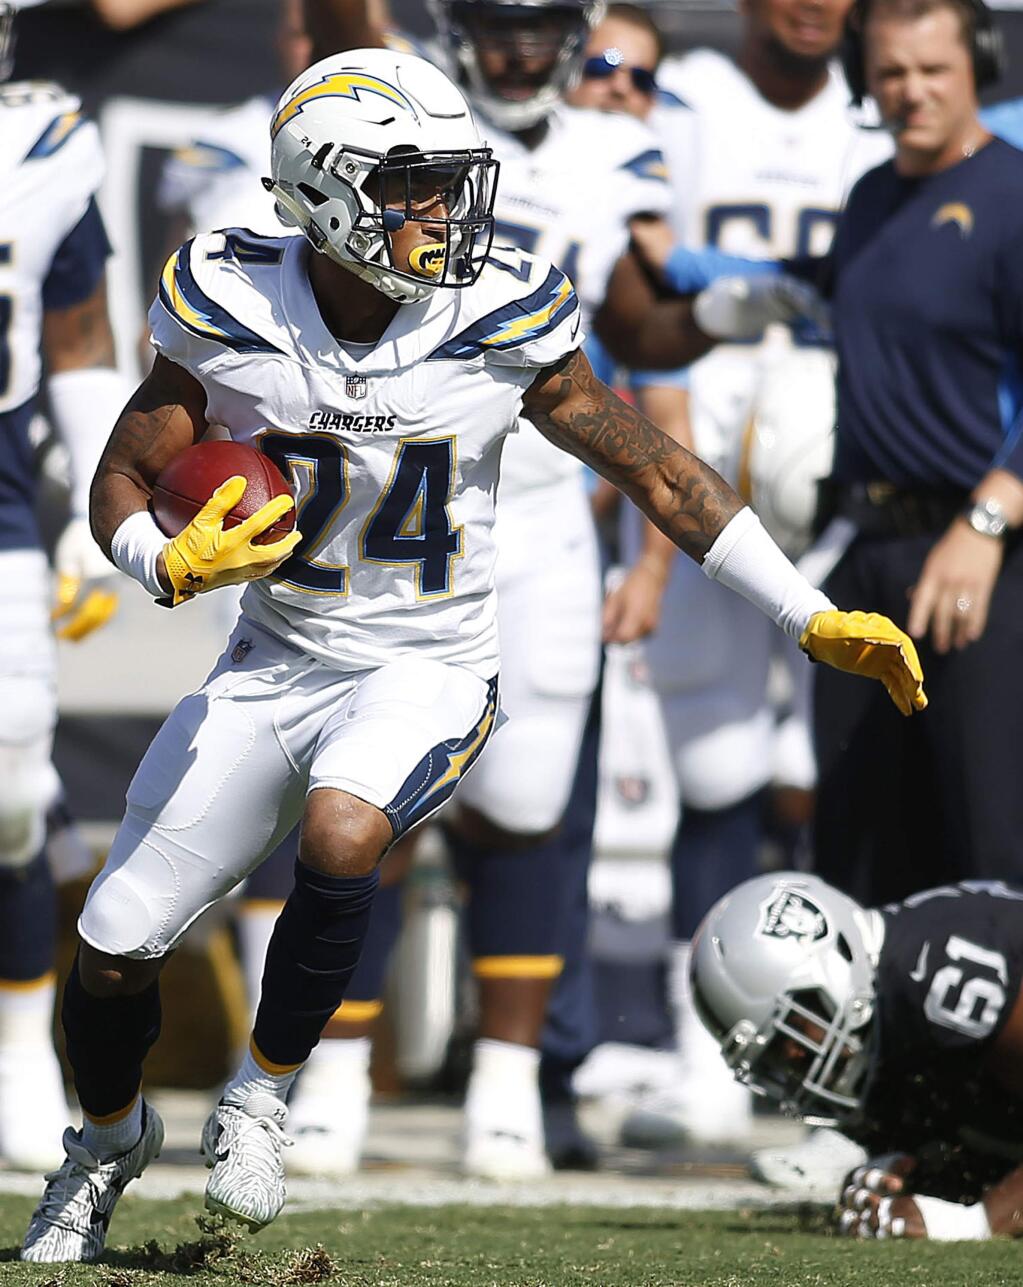 Los Angeles Chargers cornerback Trevor Williams (24) runs after intercepting a pass against the Oakland Raiders during the first half of an NFL football game in Oakland, Calif., Sunday, Oct. 15, 2017. (AP Photo/D. Ross Cameron)